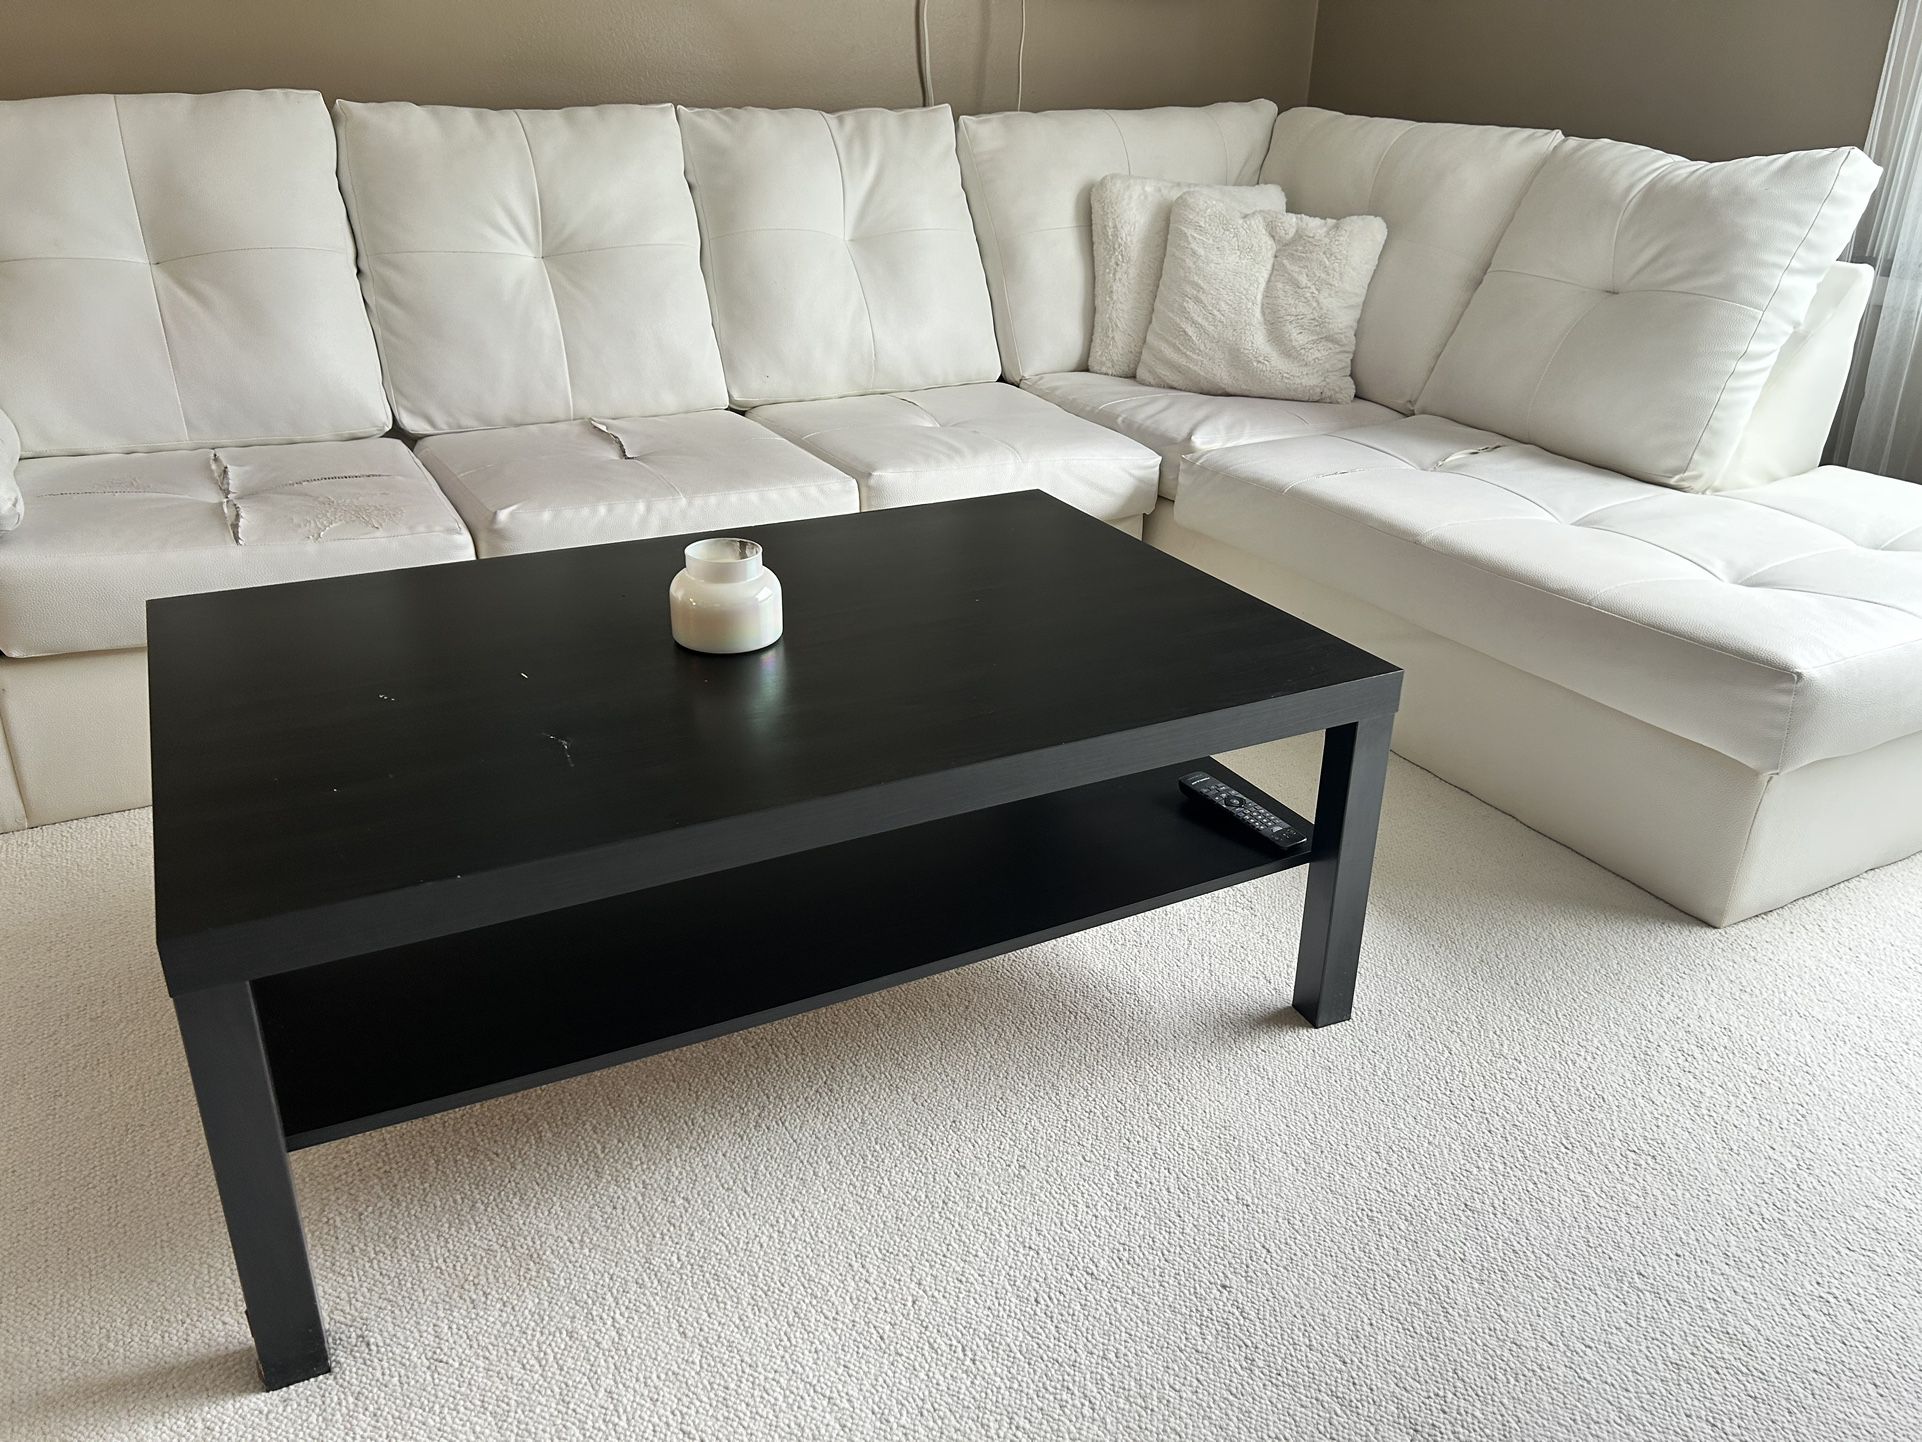 Sectional white couch for sale and table